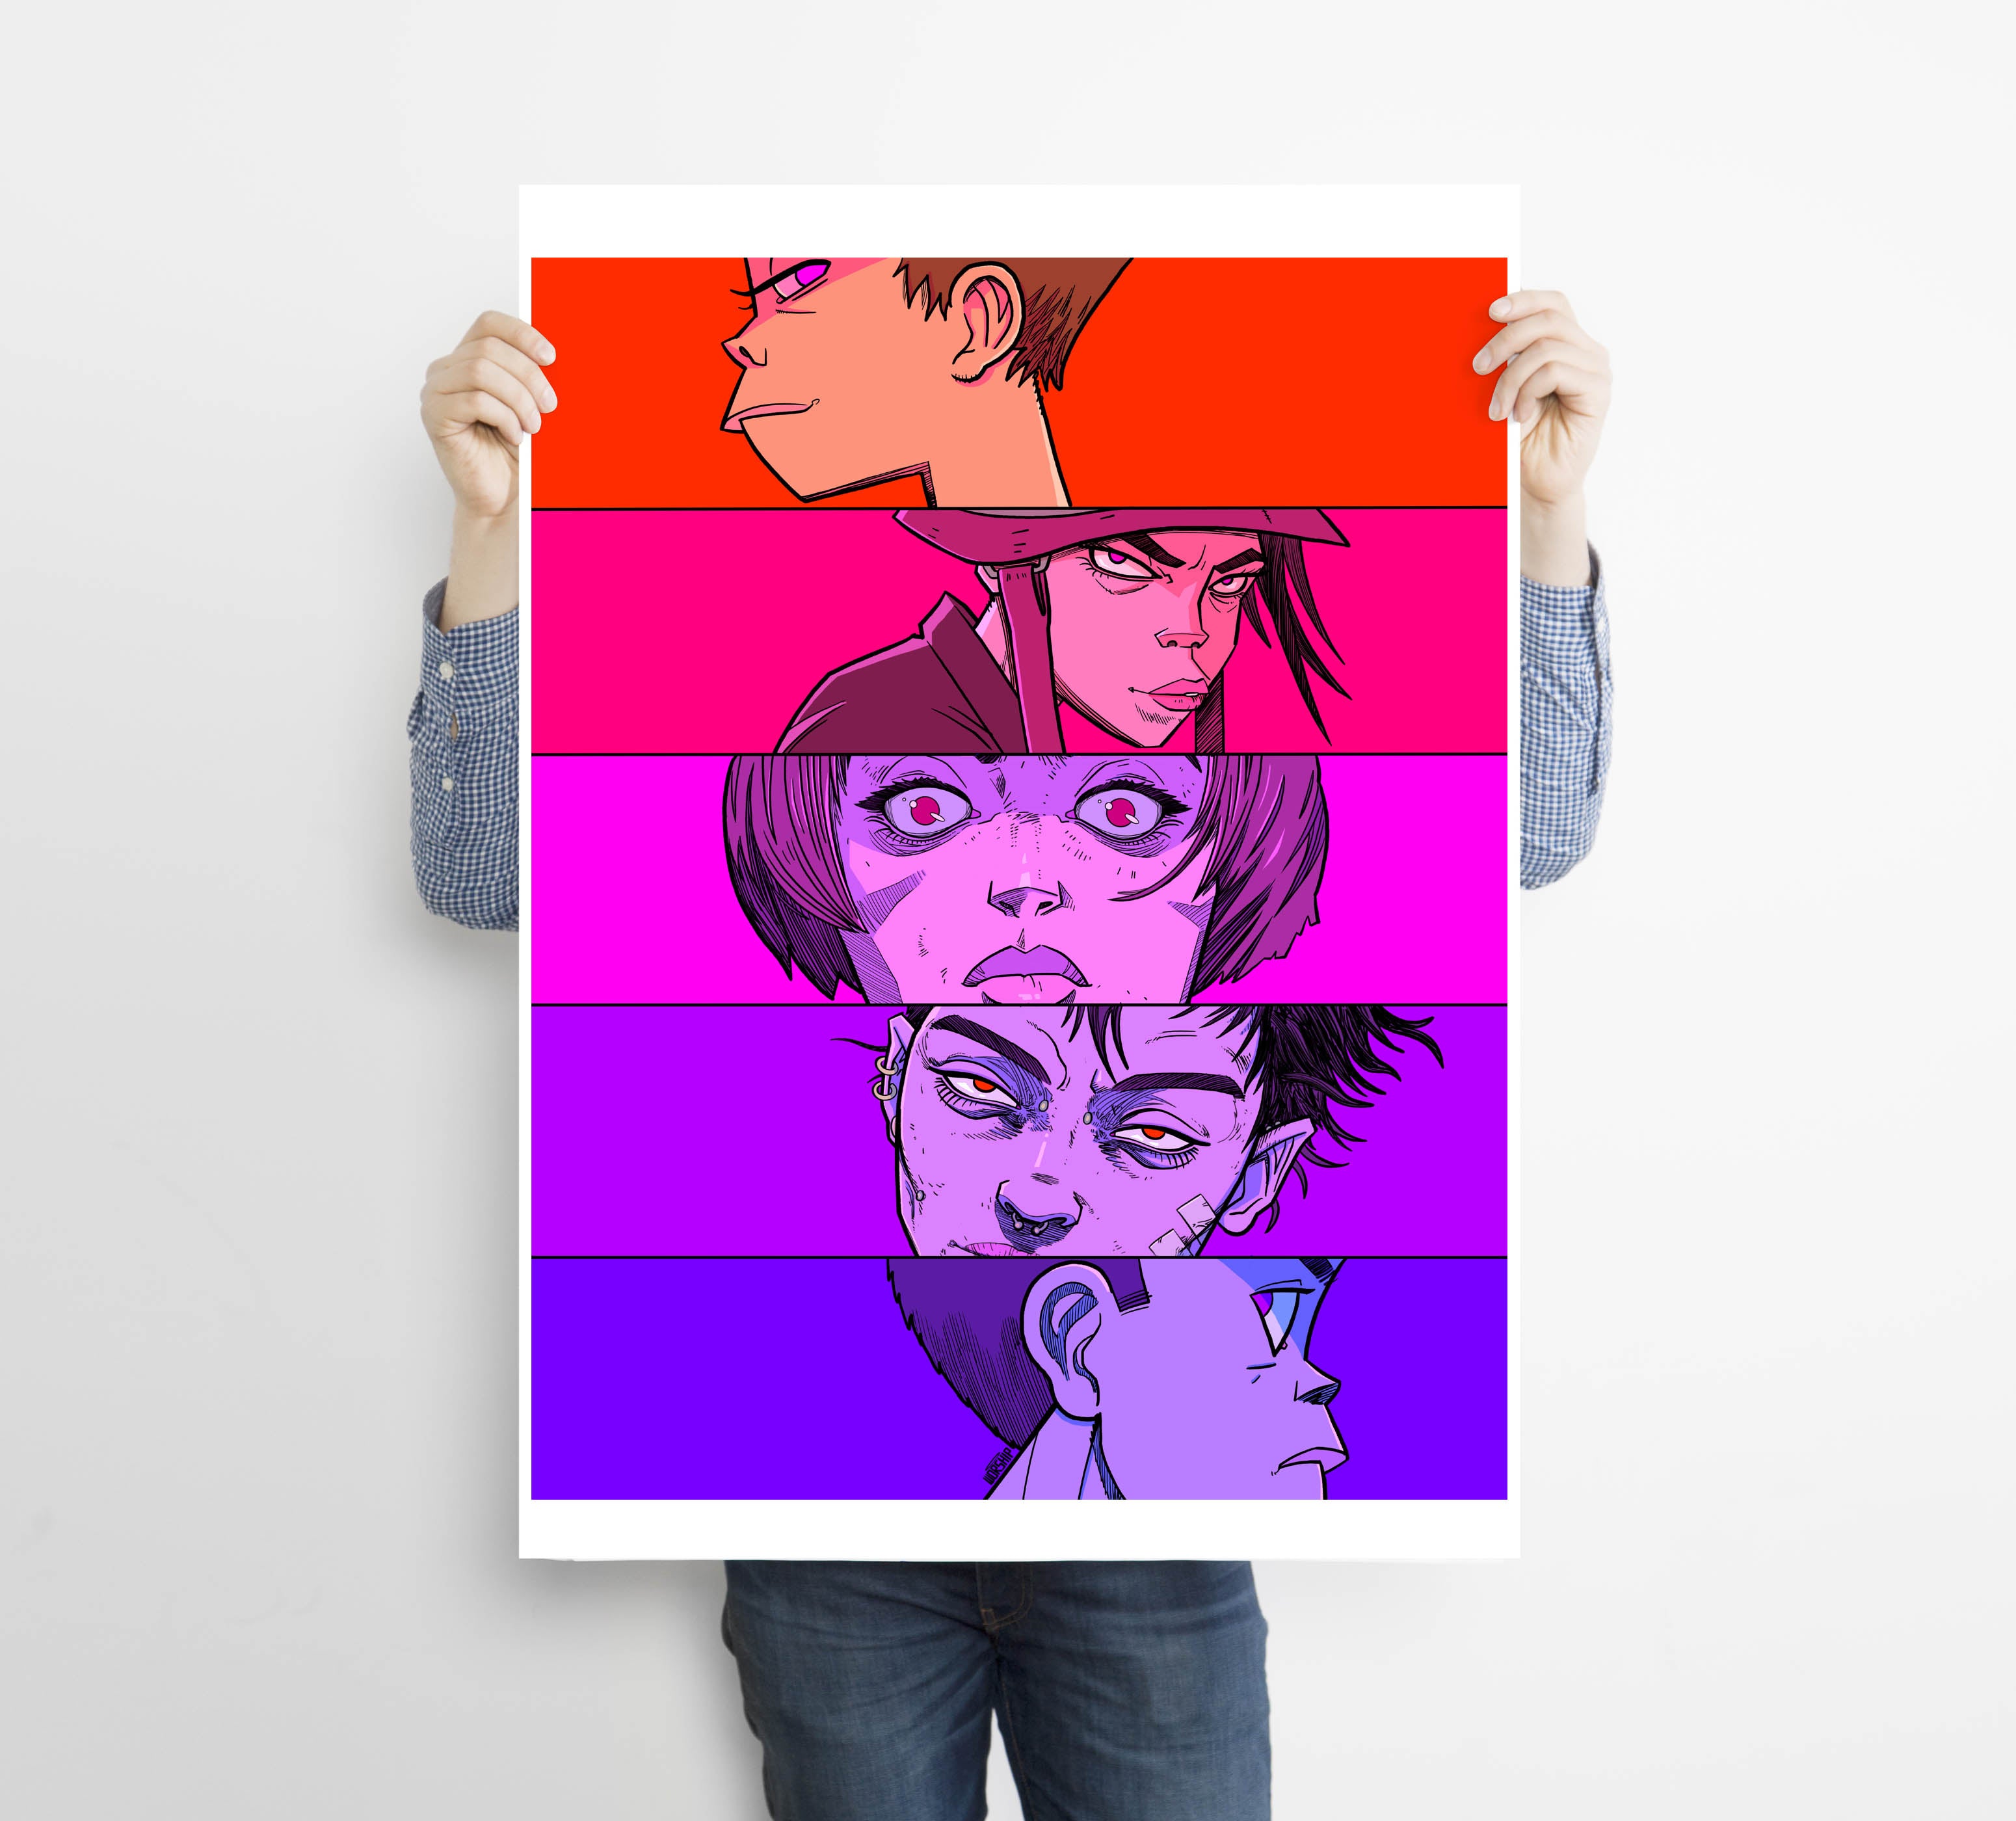 Unique and cool Gorillaz-style anime faces poster/wall art illustration